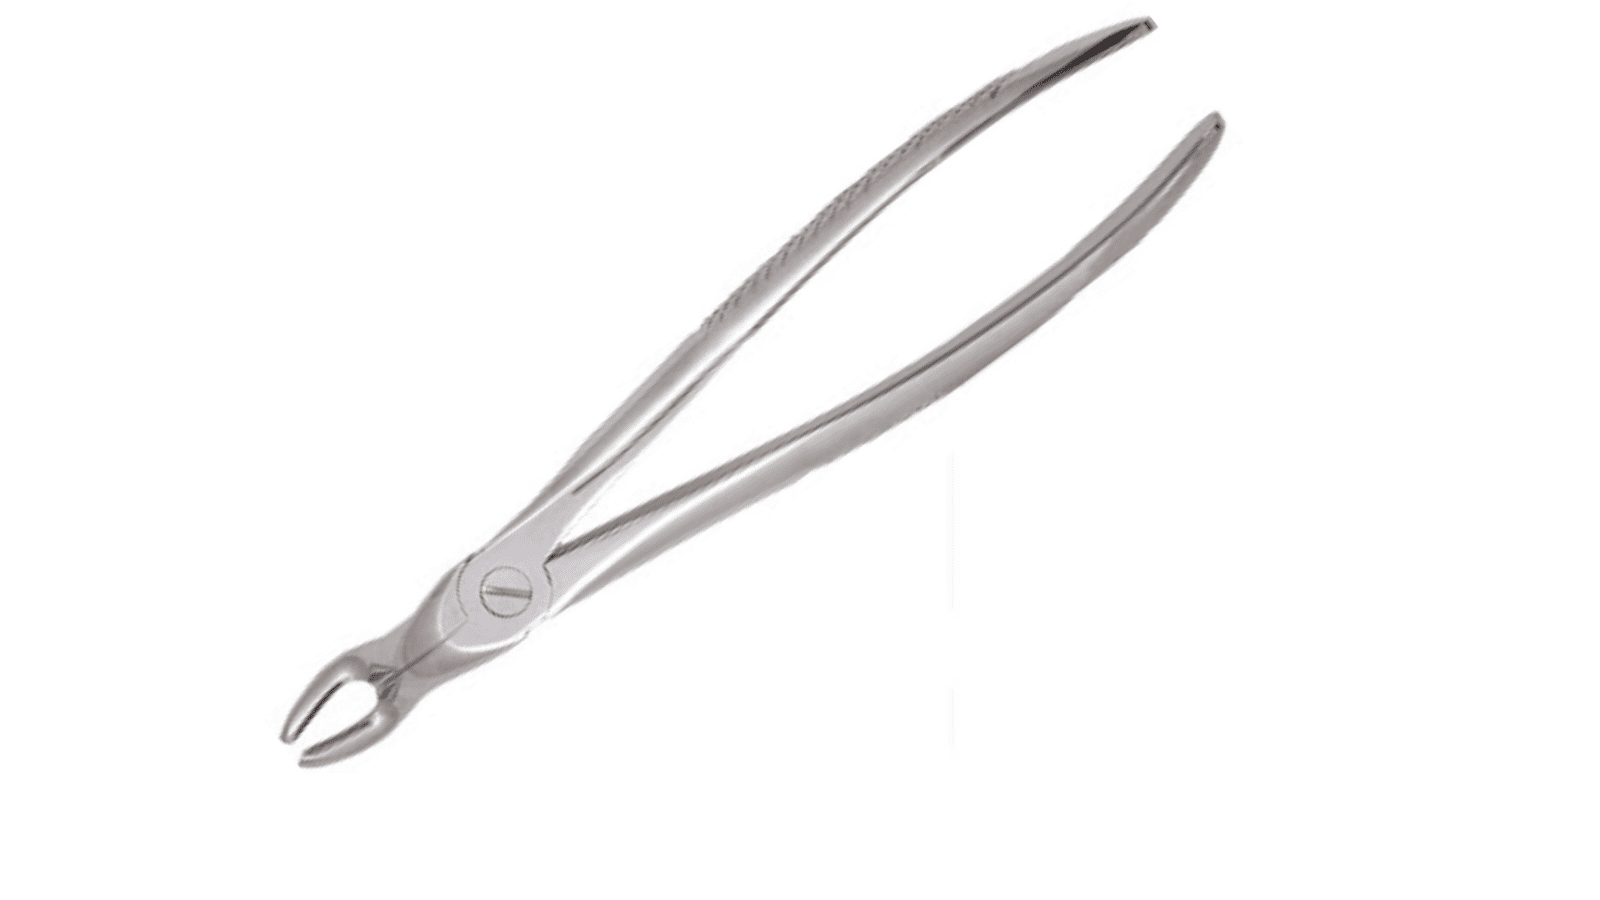 Bader figure 7 universal extraction forceps